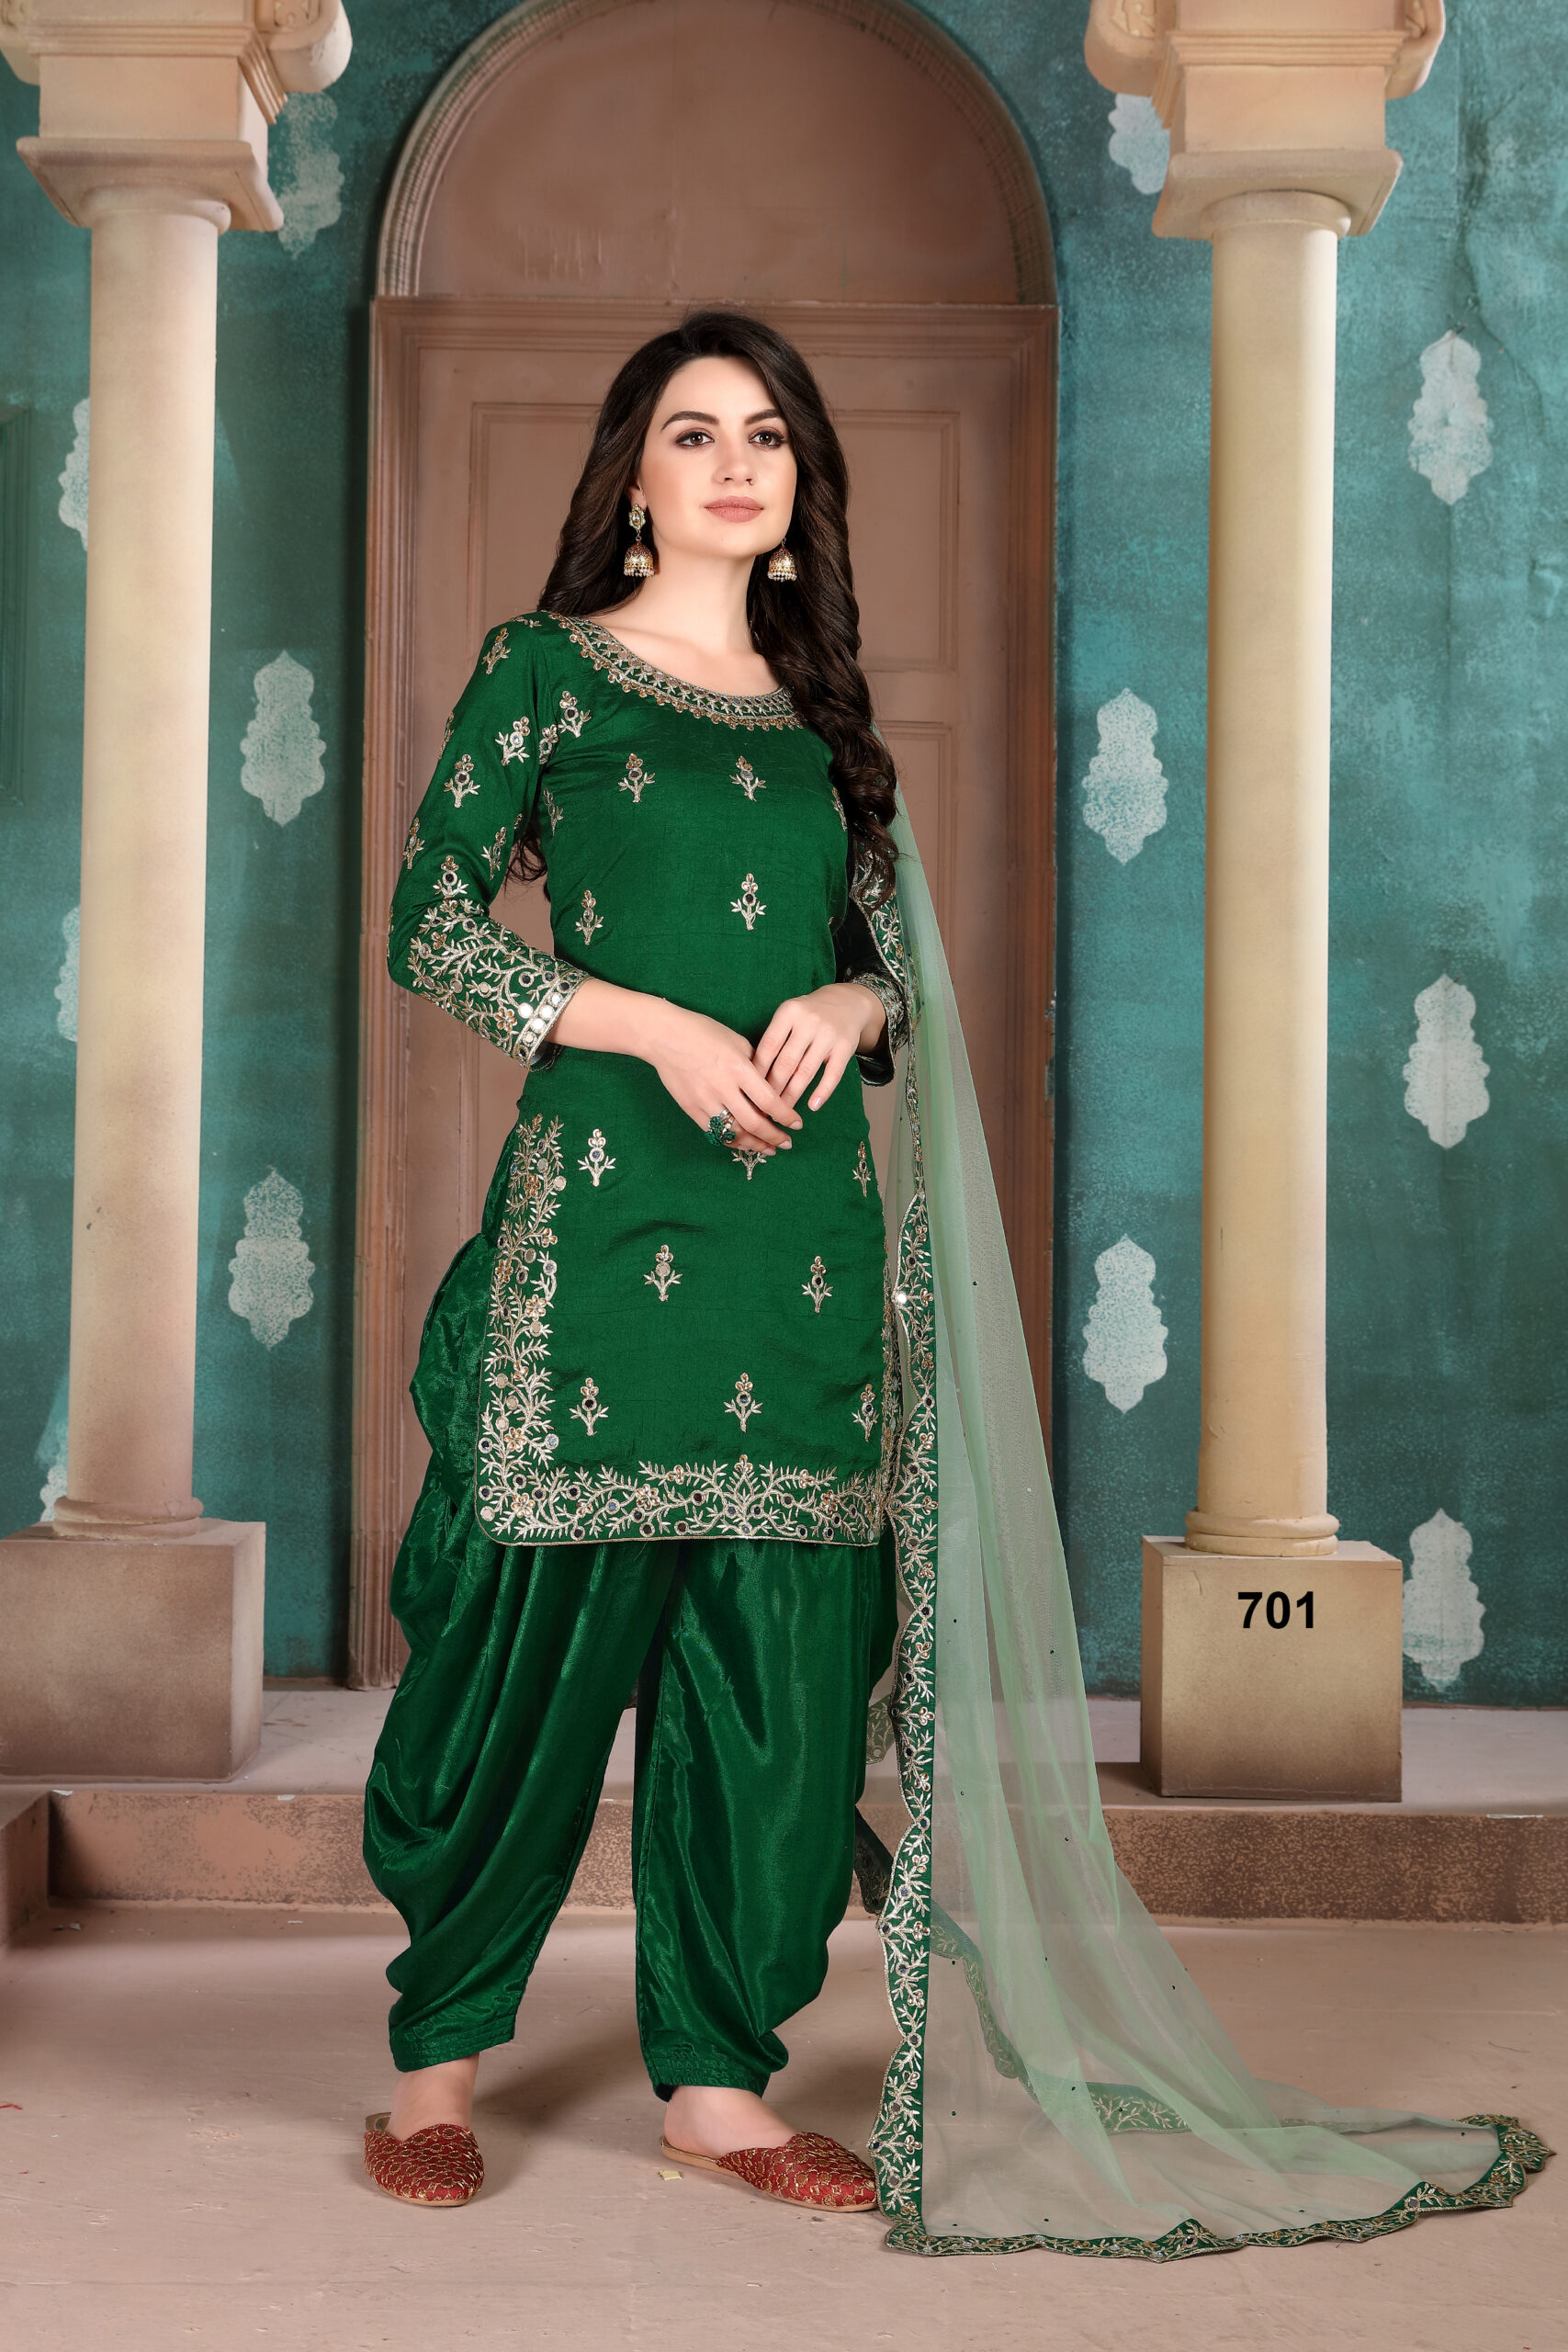 Green Suits for Woman Wedding